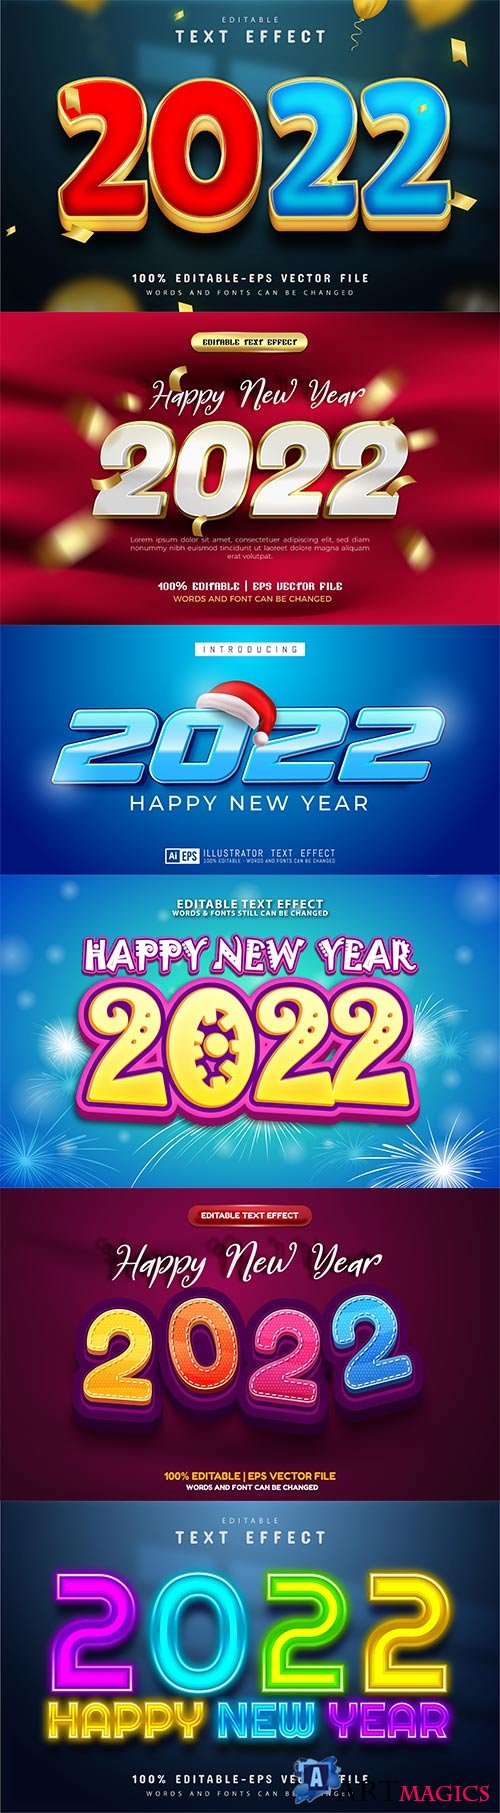 Merry christmas and happy new year 2022 editable vector text effects vol 5